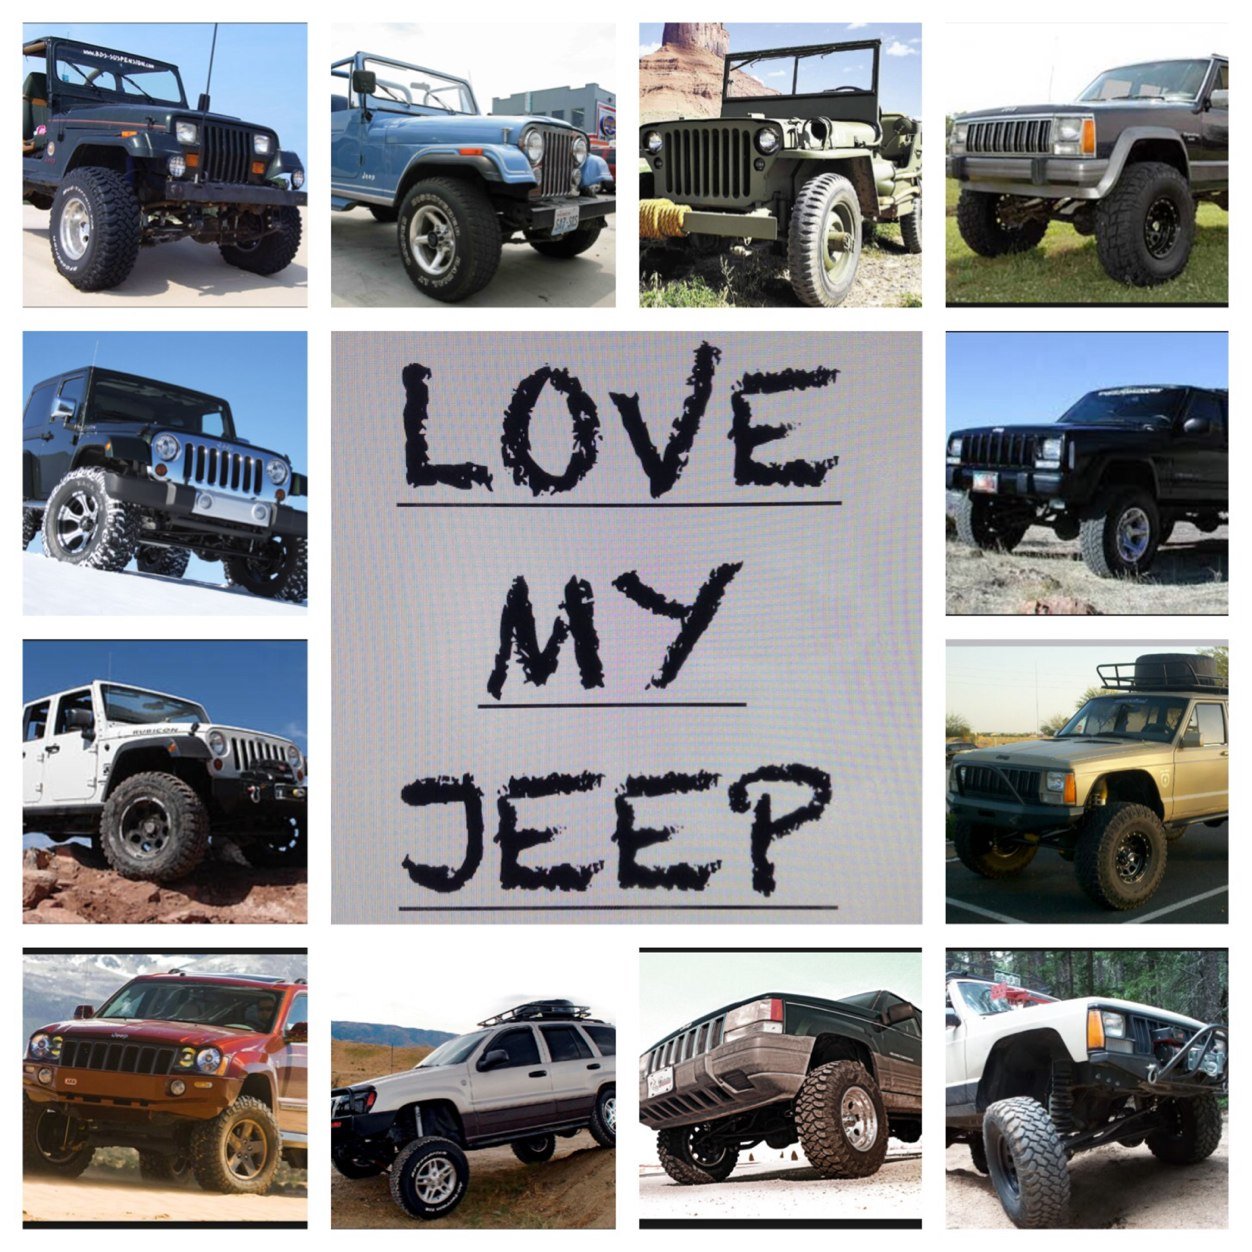 Welcome to the Jeep Life style! Message me pictures of Your XJ YJ TJ JK!!!!! Proud owner of a 95 YJ soon to be owner of a TJ!! enjoy the Page & follow and jeep!